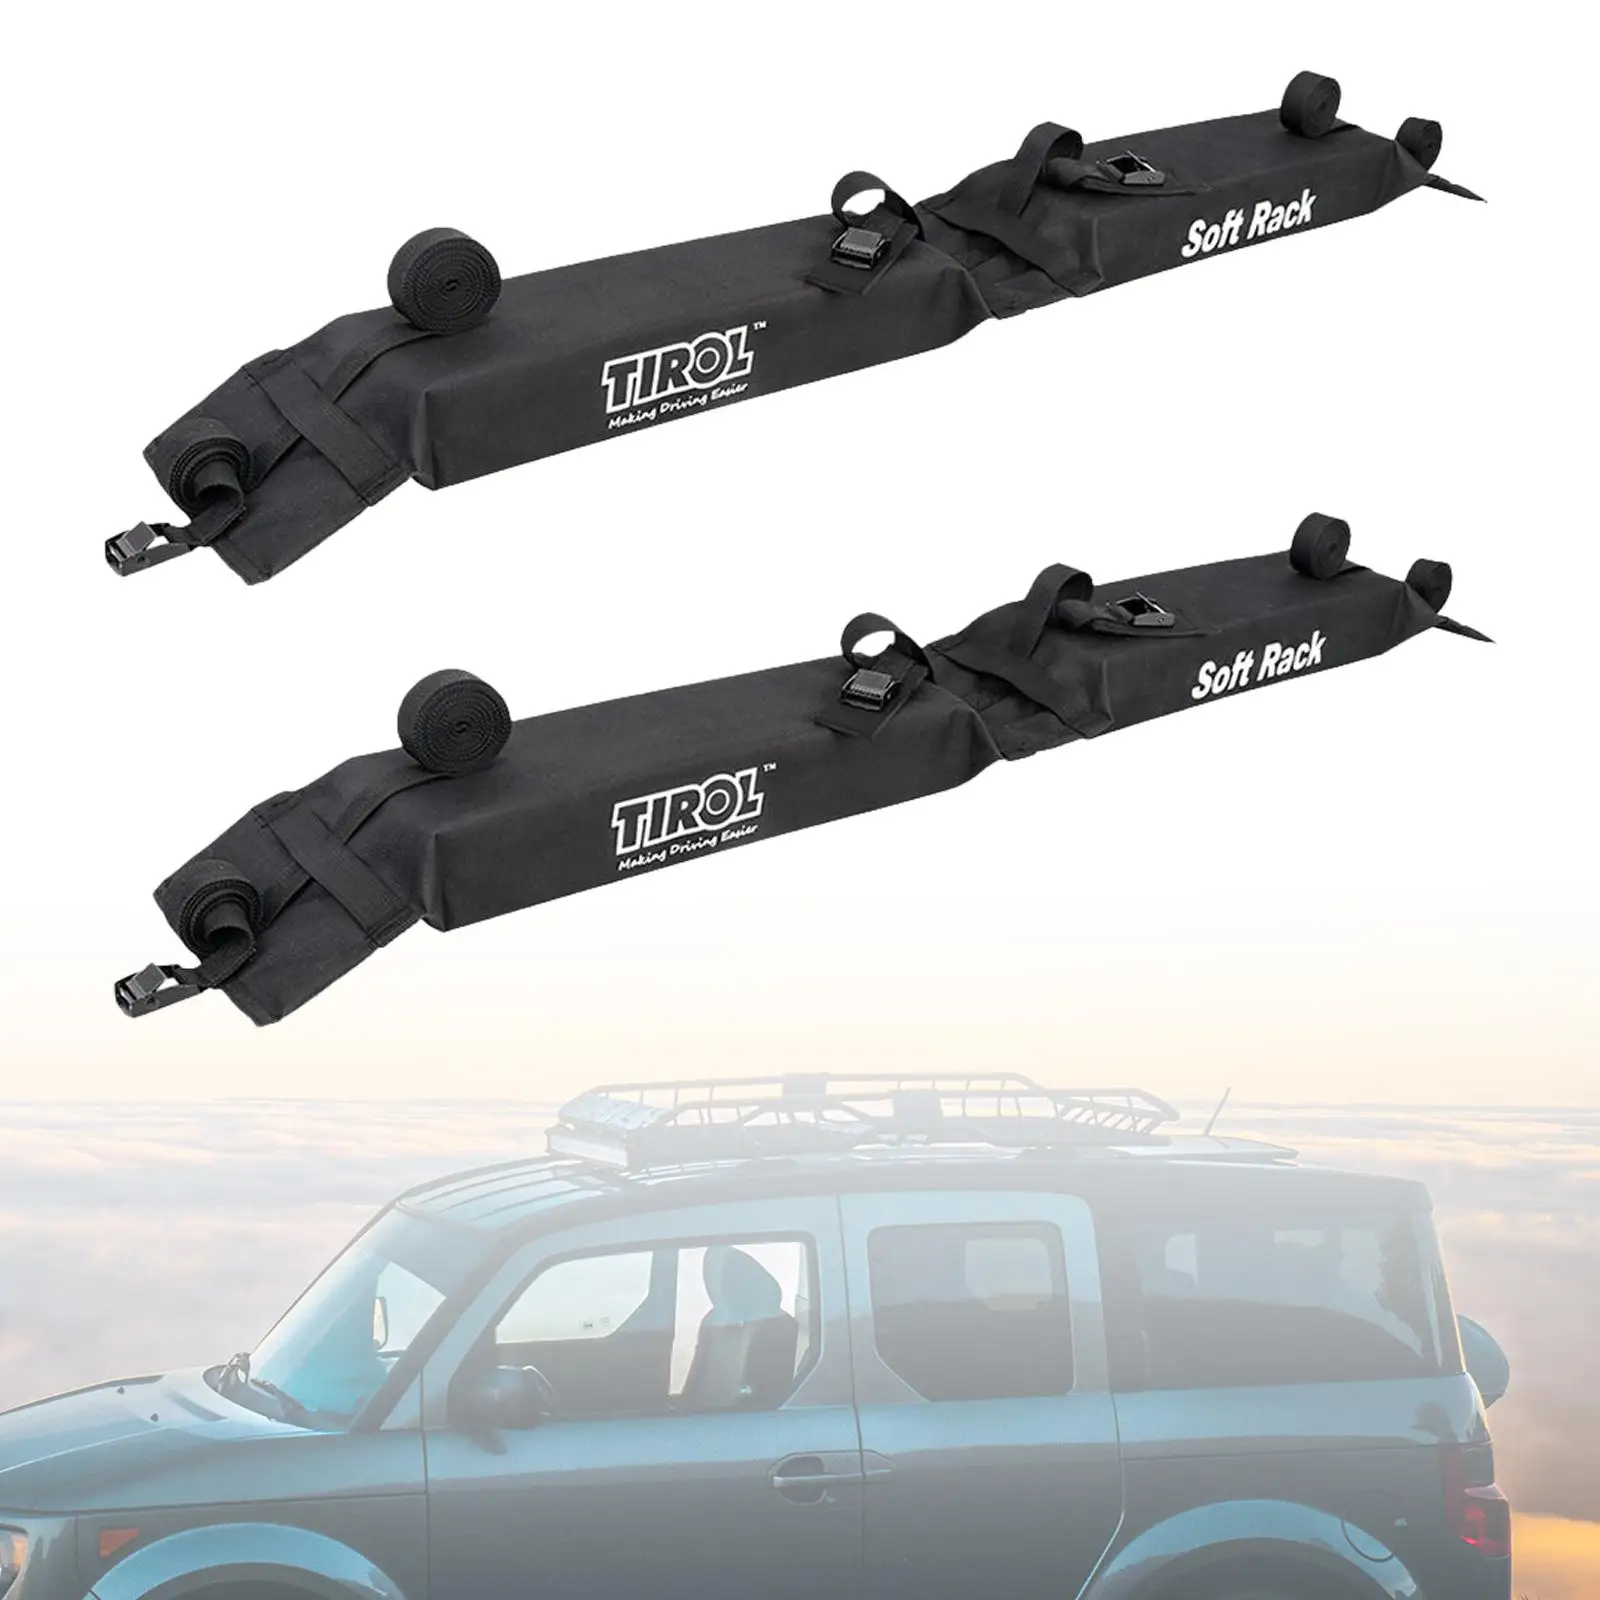 2 Pieces Universal Foldable Soft Roof paddleboard Luggage Carrier